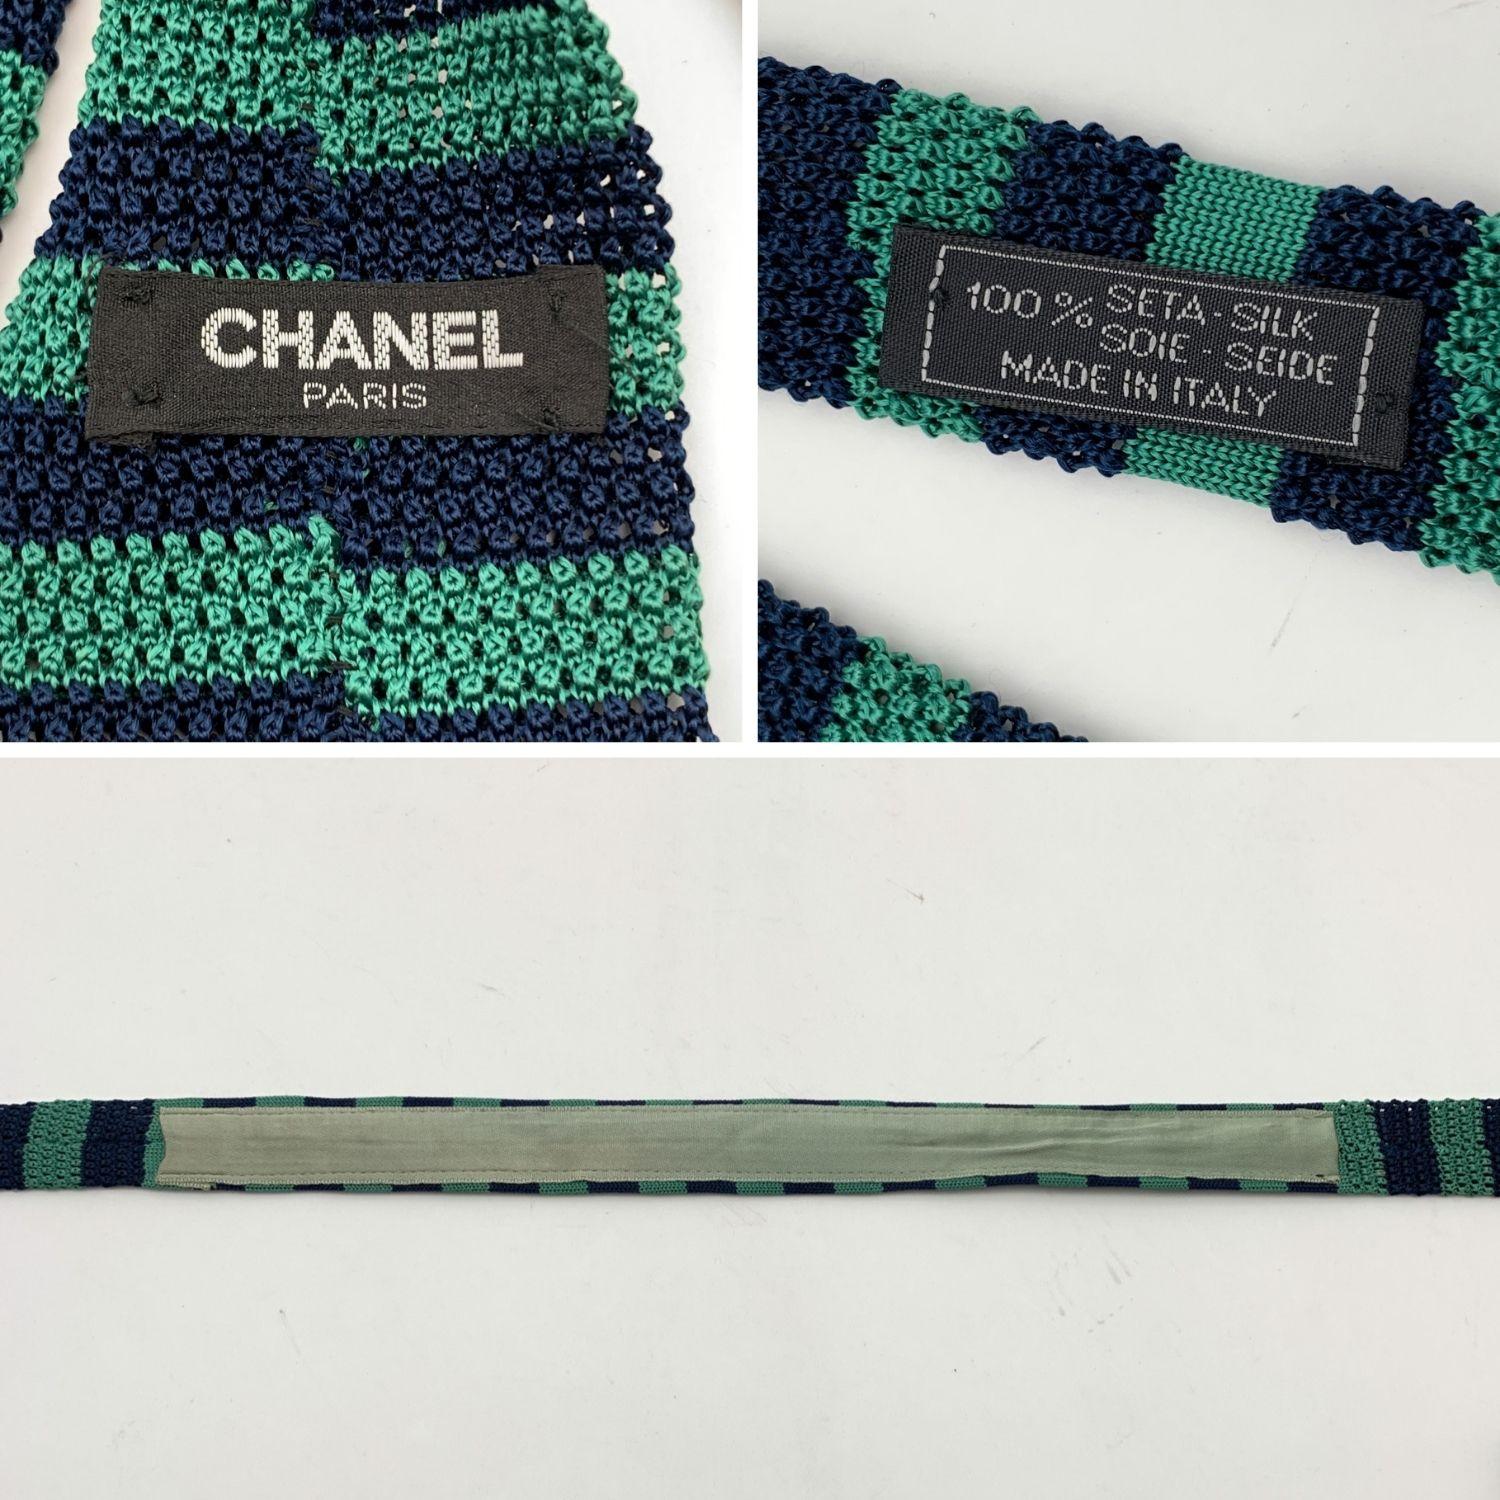 Elegant Chanel knitted neck tie in green and blue color. Striped design. Gold metal chain detail on the back along the hem. Embroidered CC Logo in yellow color. Scalloped hem. Composition: 100% Silk. Chanel composition tag attached. Made in Italy.